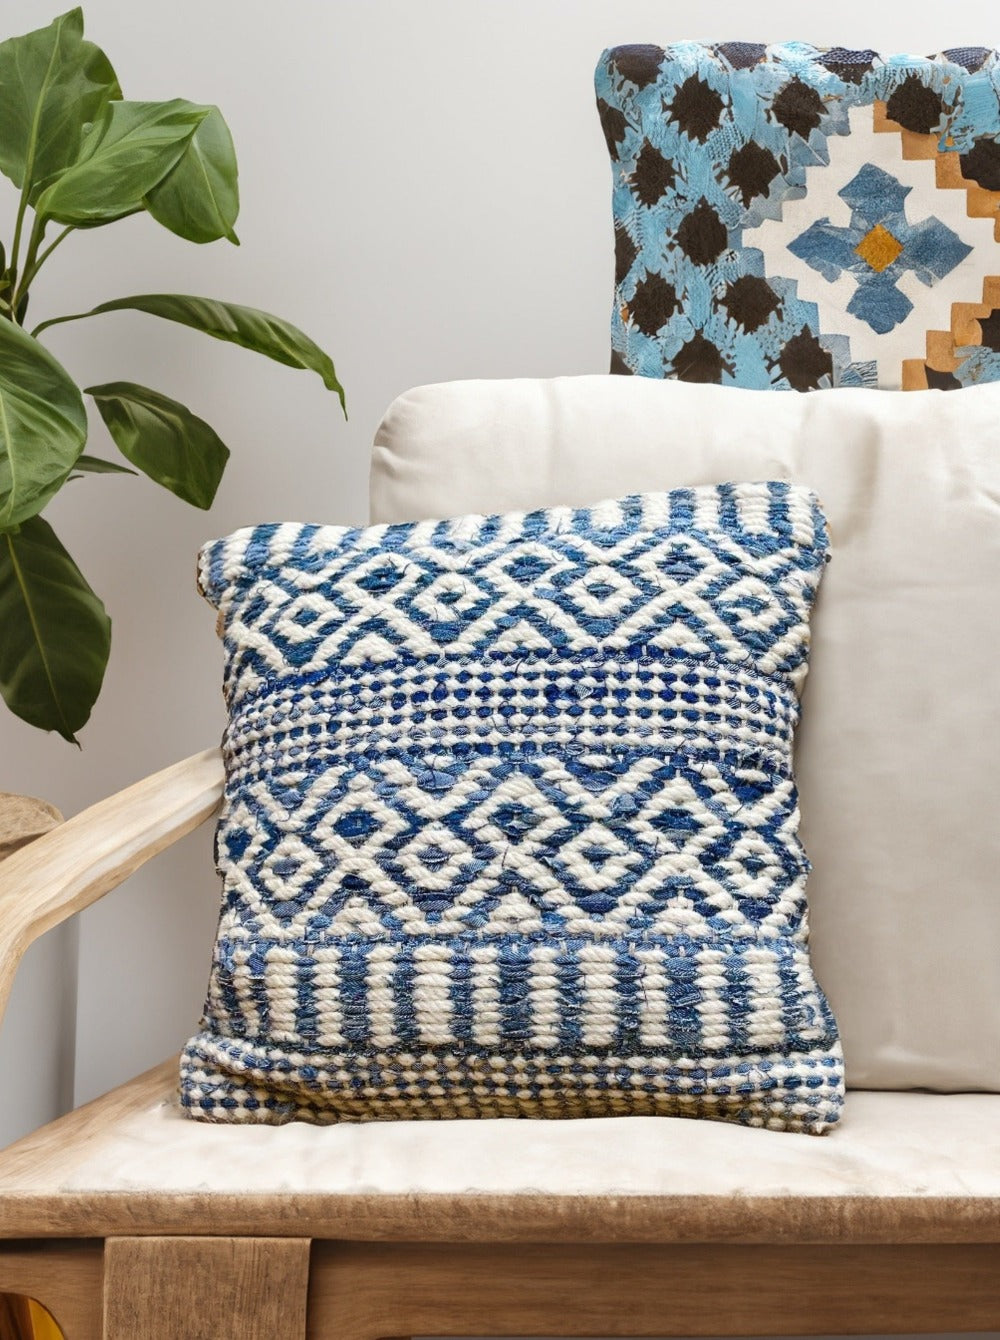 Blue Cushion with Wool and Recycled Denim